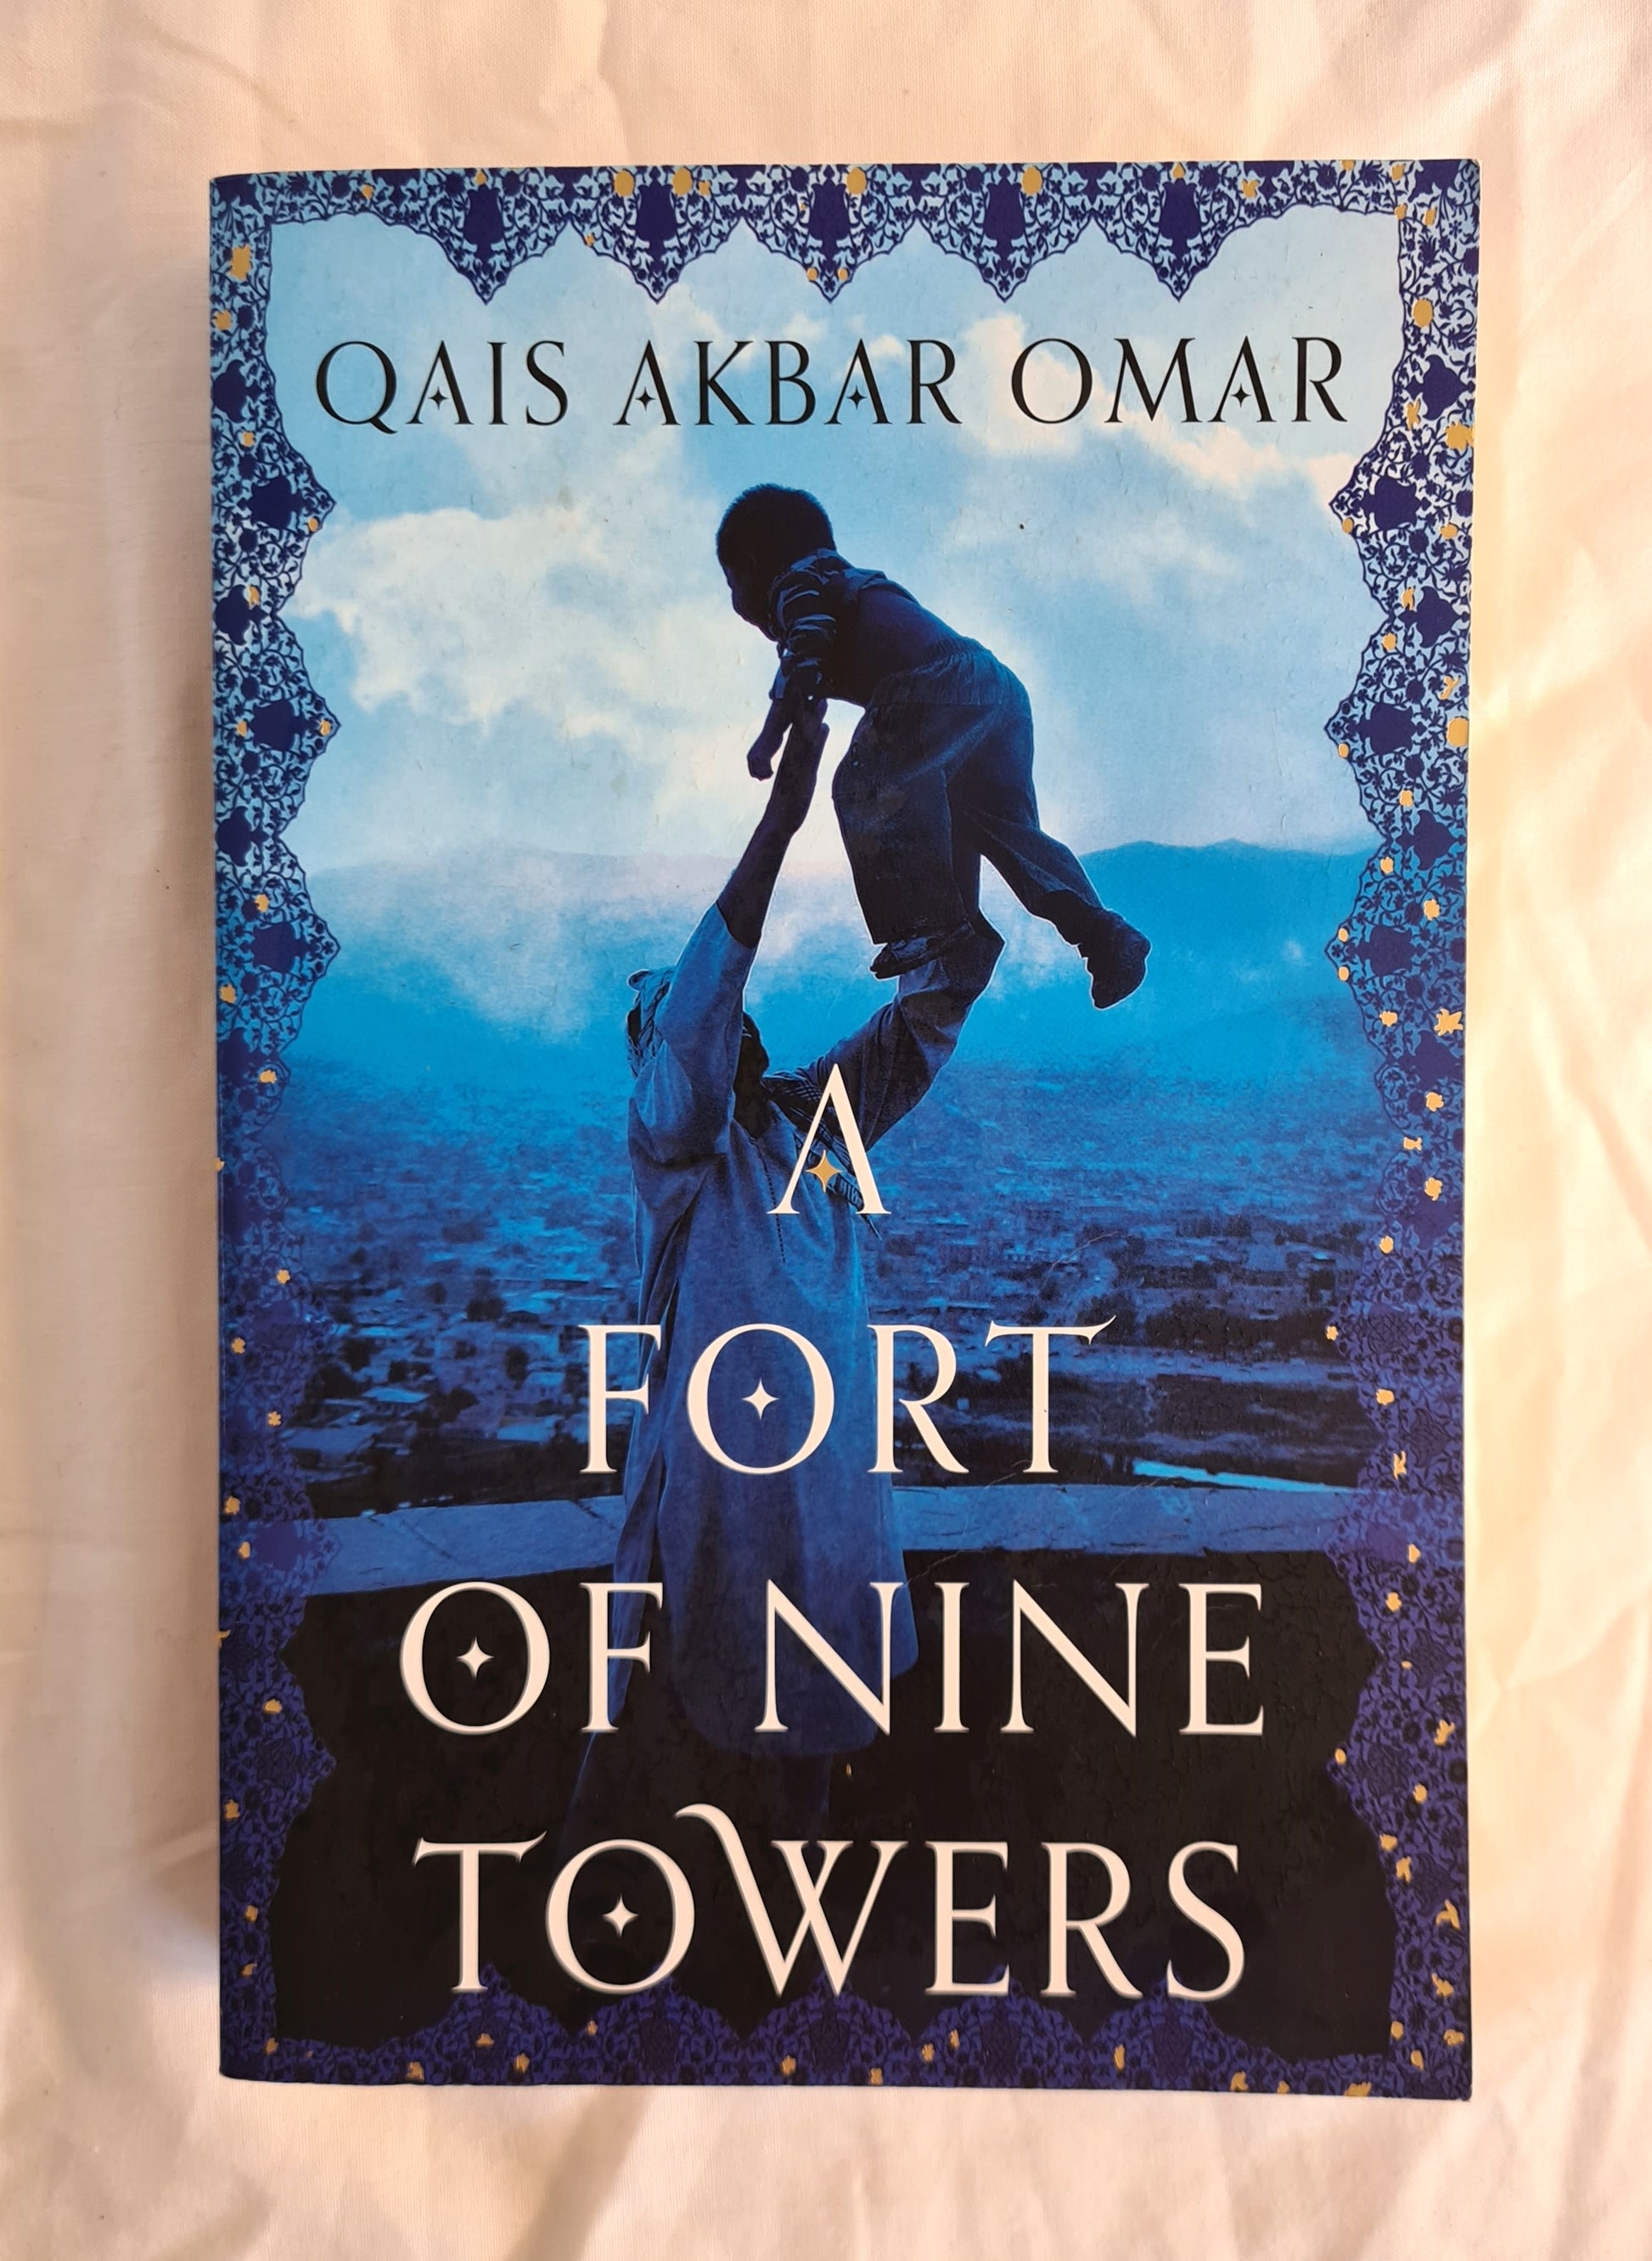 A Fort of Nine Towers  by Oais Akbar Omar